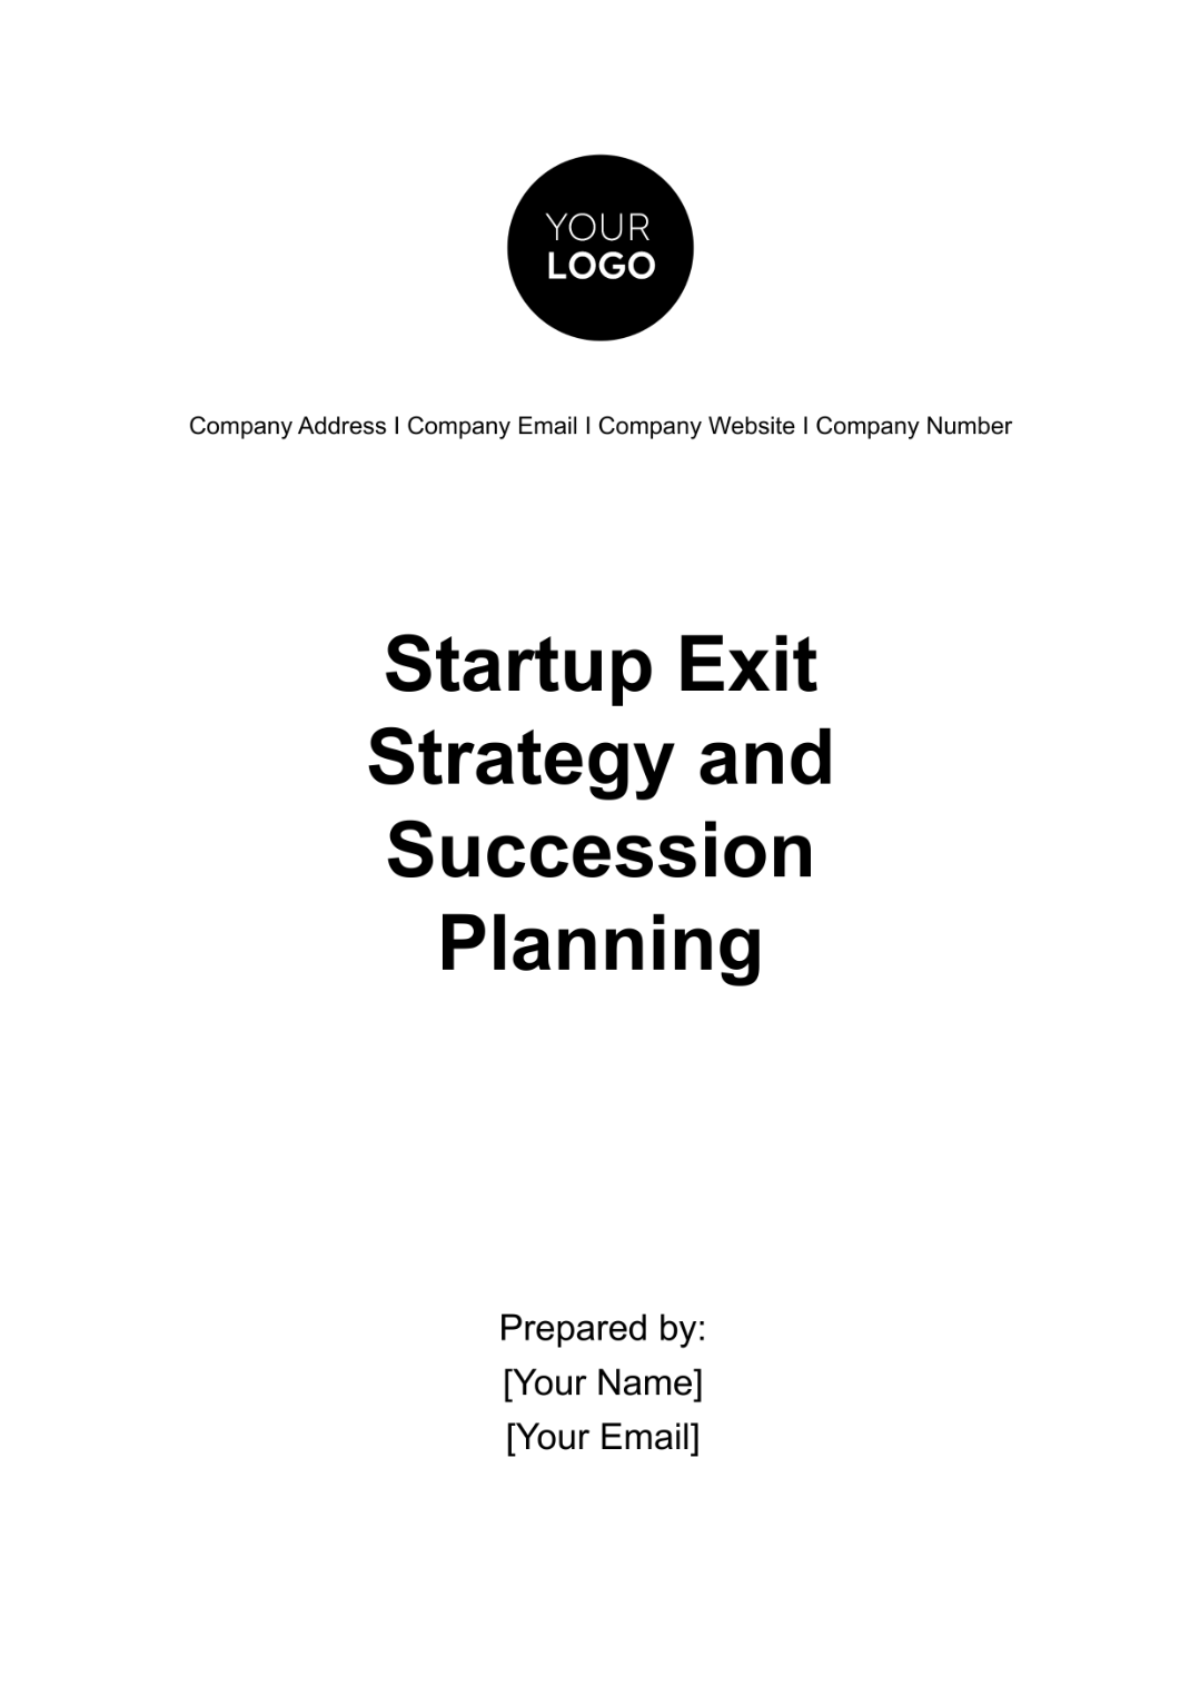 Startup Exit Strategy and Succession Planning Template